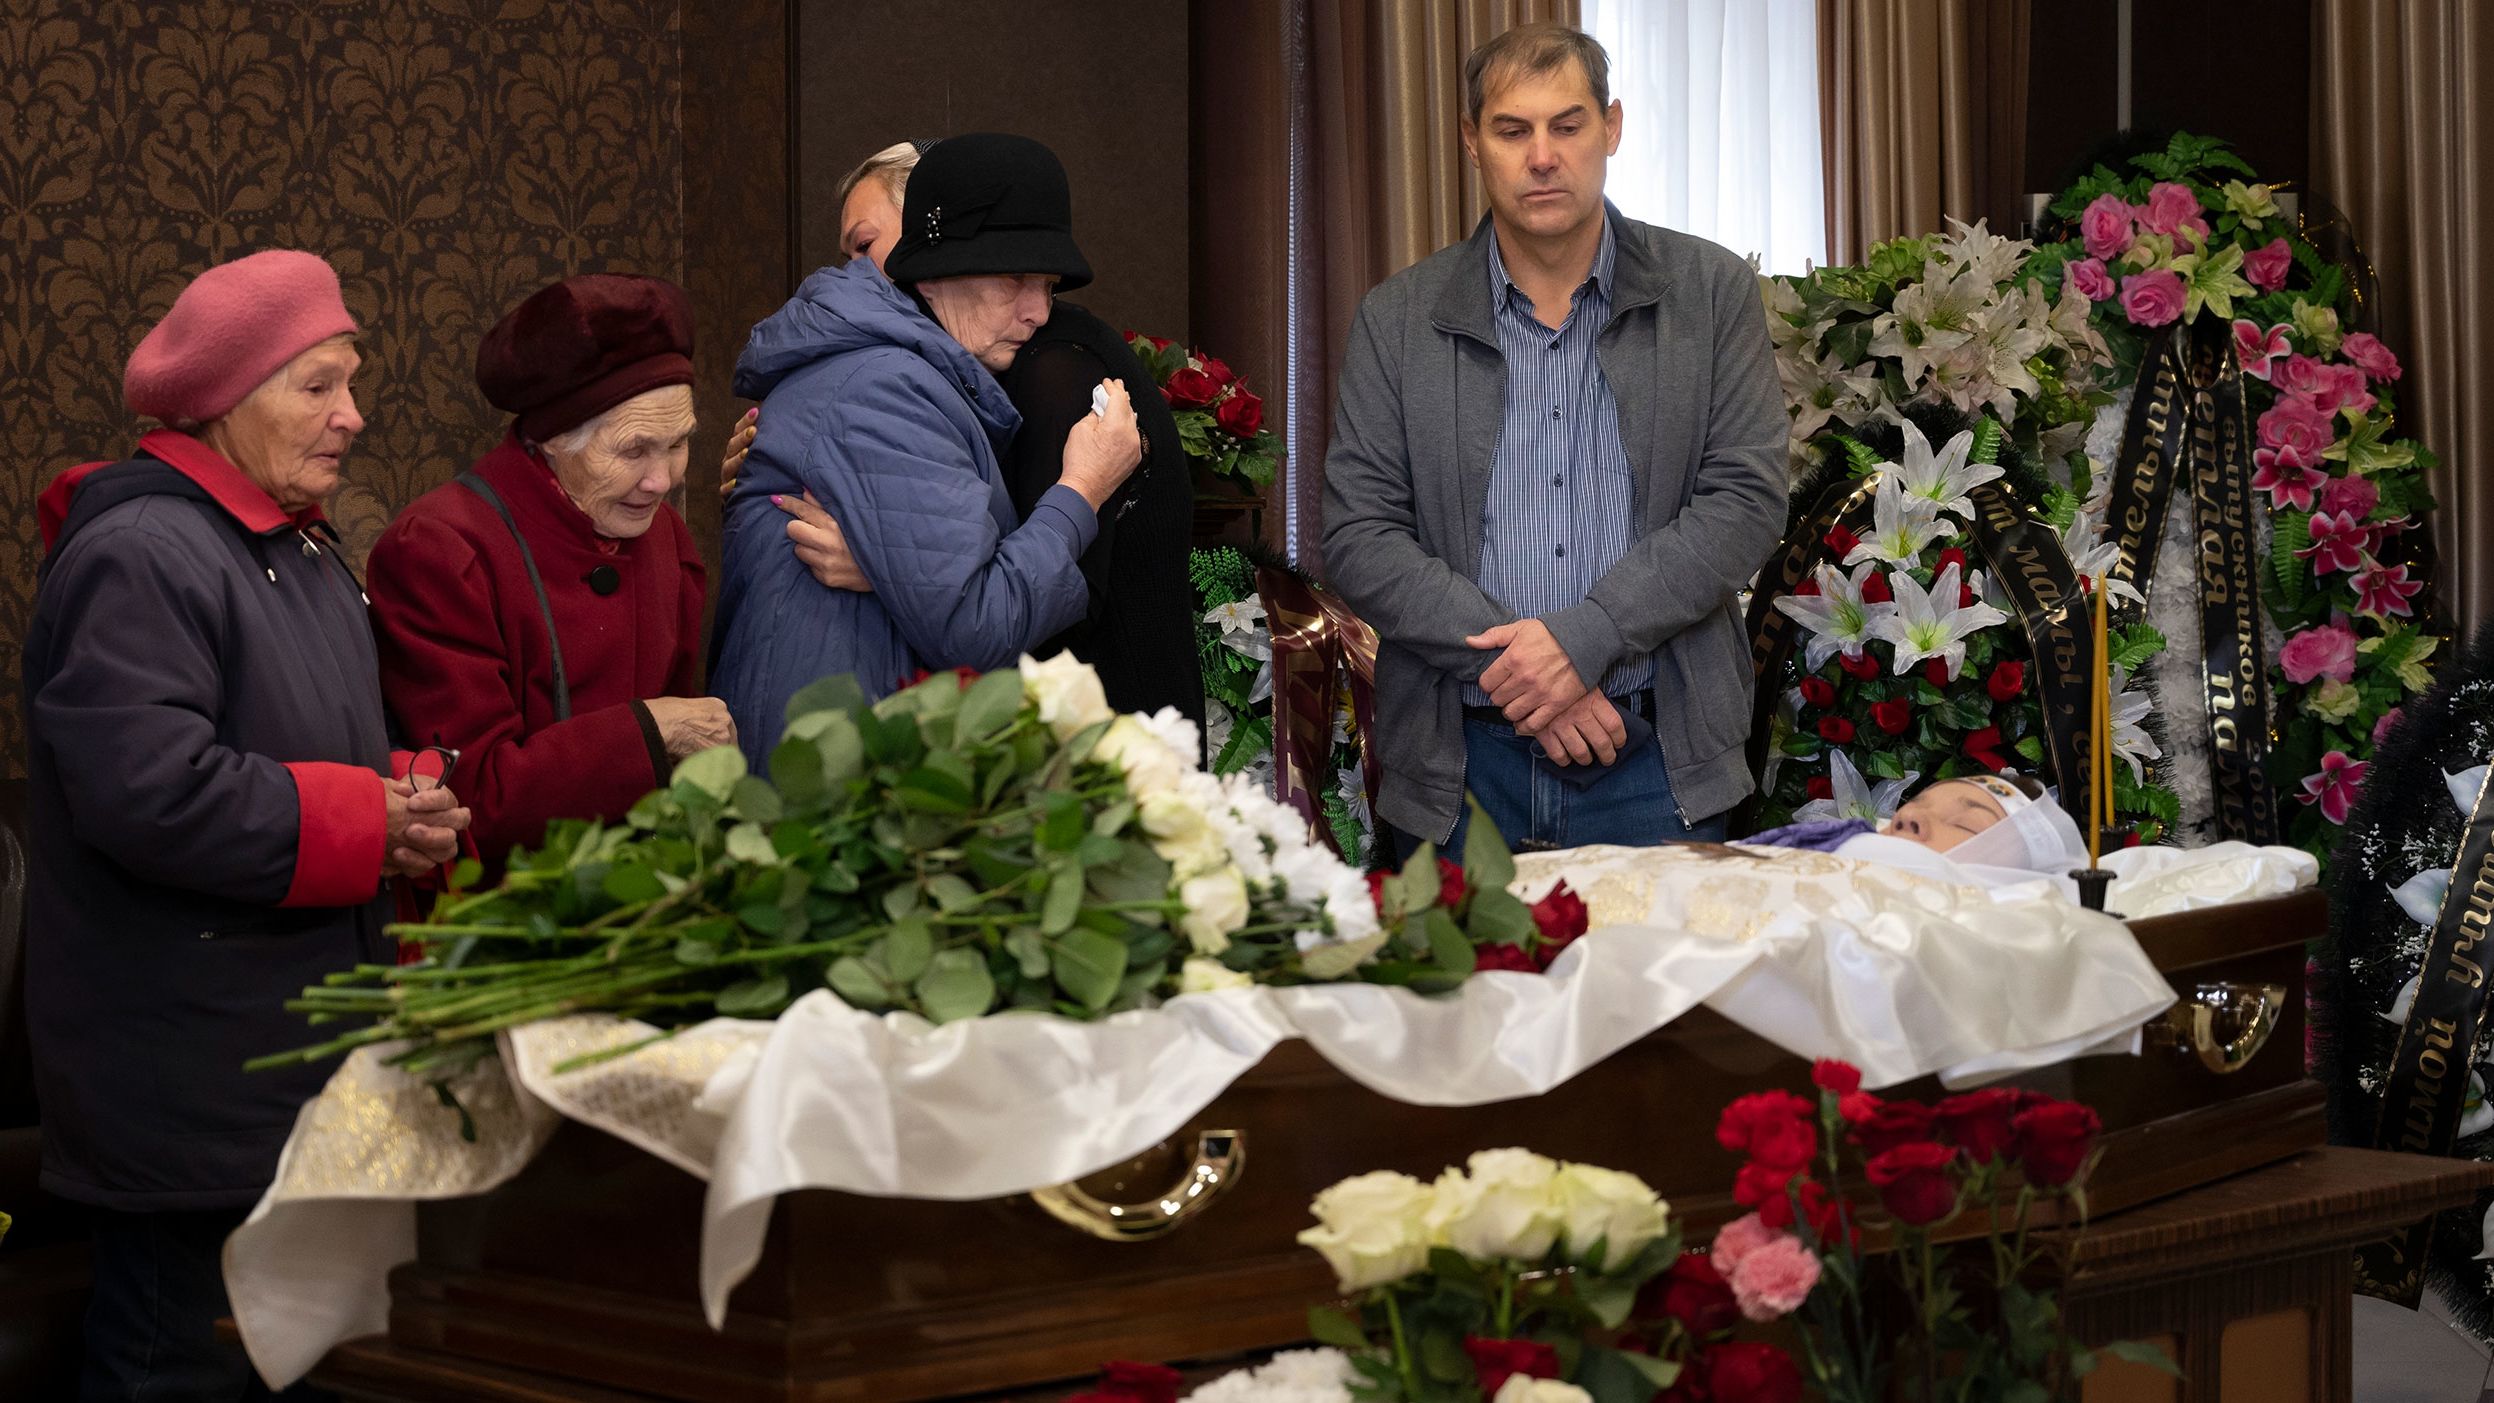 People react Wednesday, September 28, as they attend a farewell to teacher Natalya Vedernikova, one of the victims of a <a href="https://www.cnn.com/2022/09/26/europe/izhevsk-school-shooting-russia-intl" target="_blank">school shooting</a> in Izhevsk, Russia. At least 11 children were killed on Monday when a gunman wearing Nazi symbols opened fire at the school, Russian authorities said Monday. Investigators said 24 people, including 22 children, were injured.